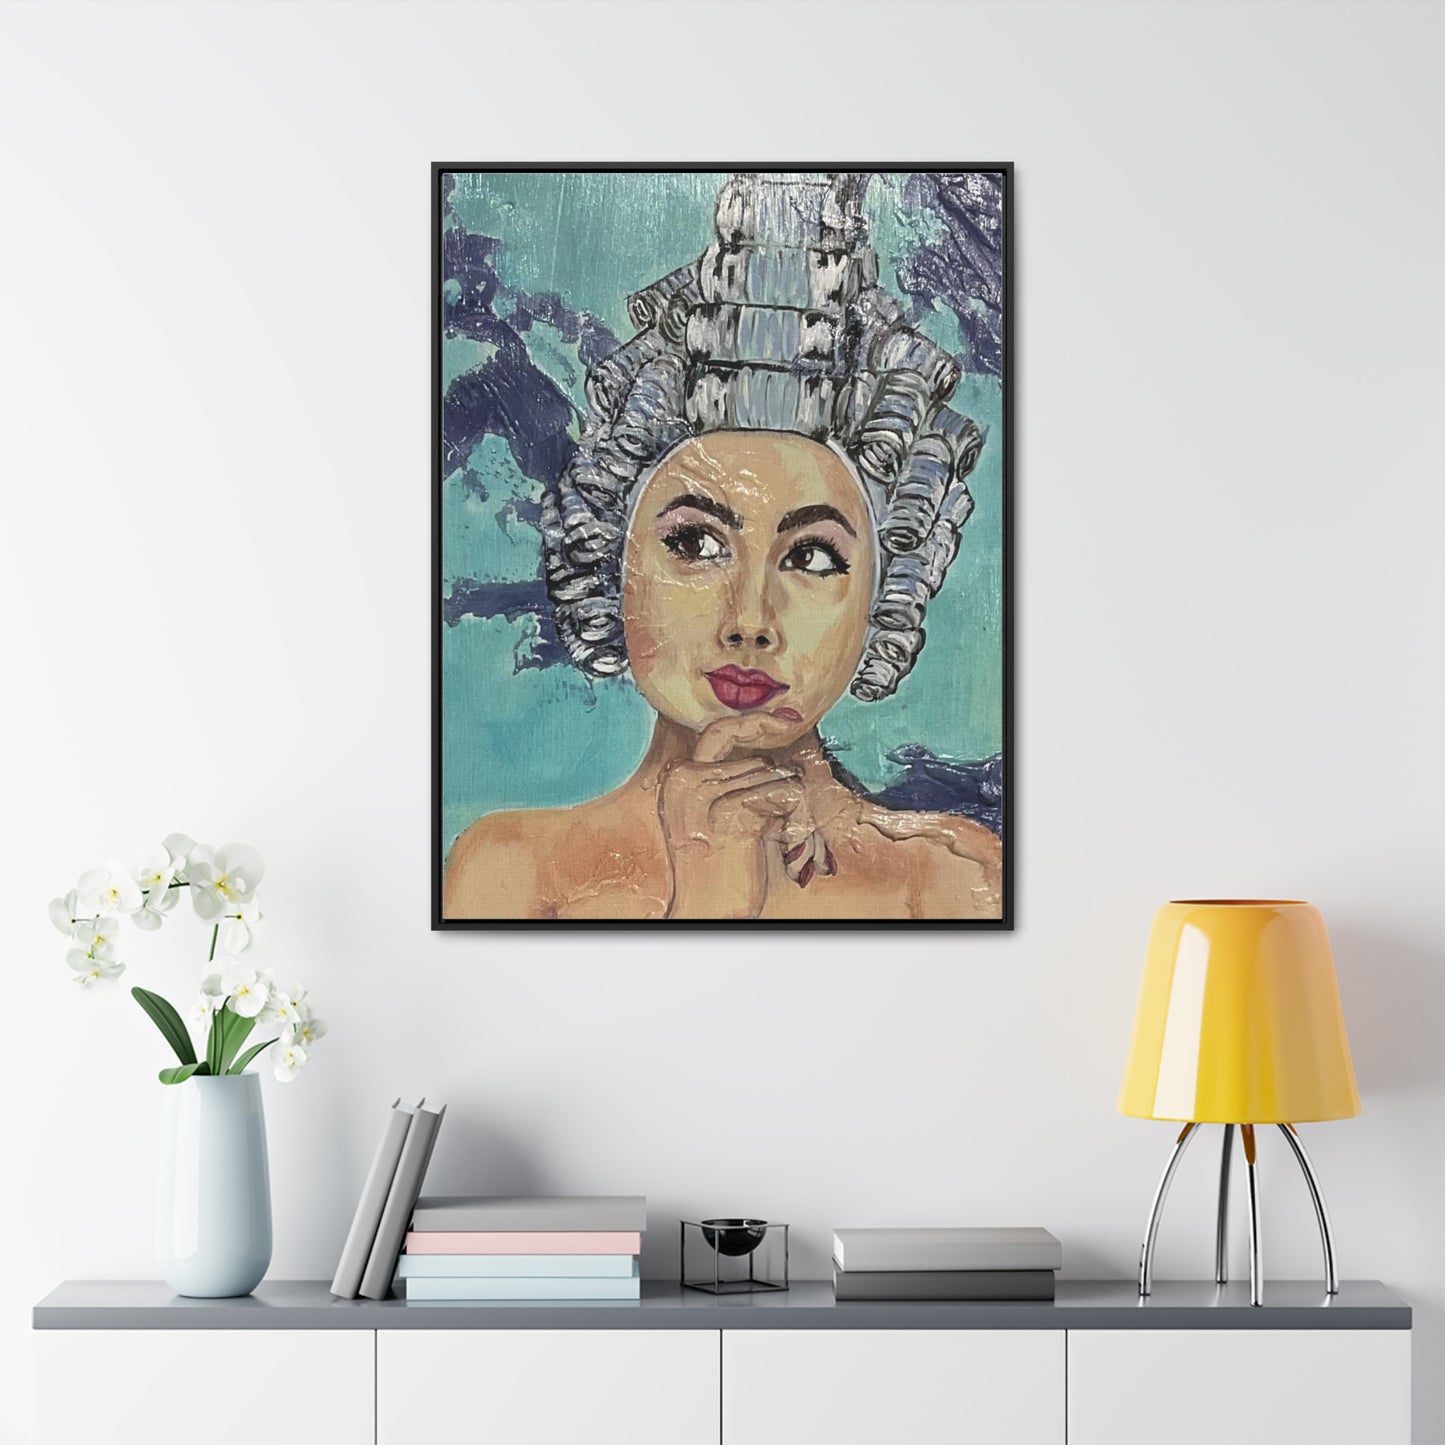 It’s Fun to Contemplate - Canvas Wrapped Framed Print